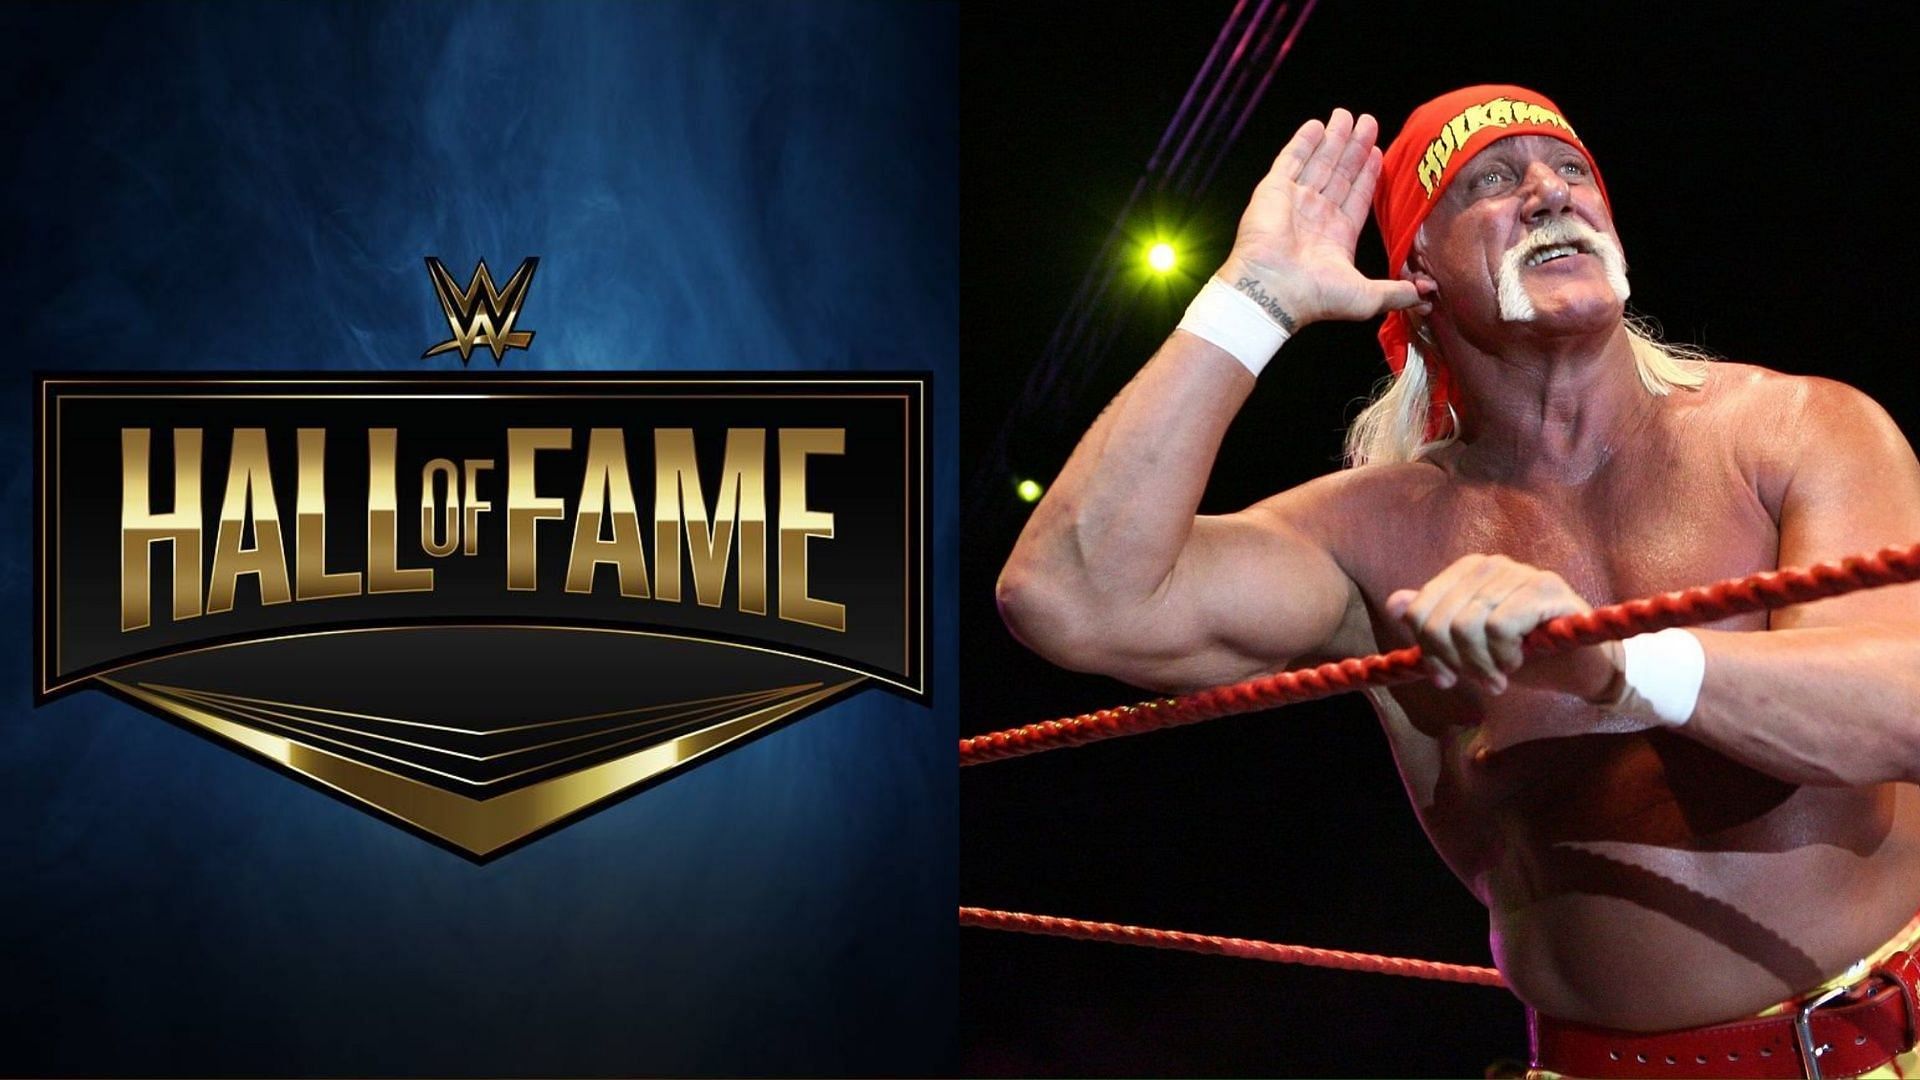 Hulk Hogan was inducted to the WWE Hall of Fame in 2005.